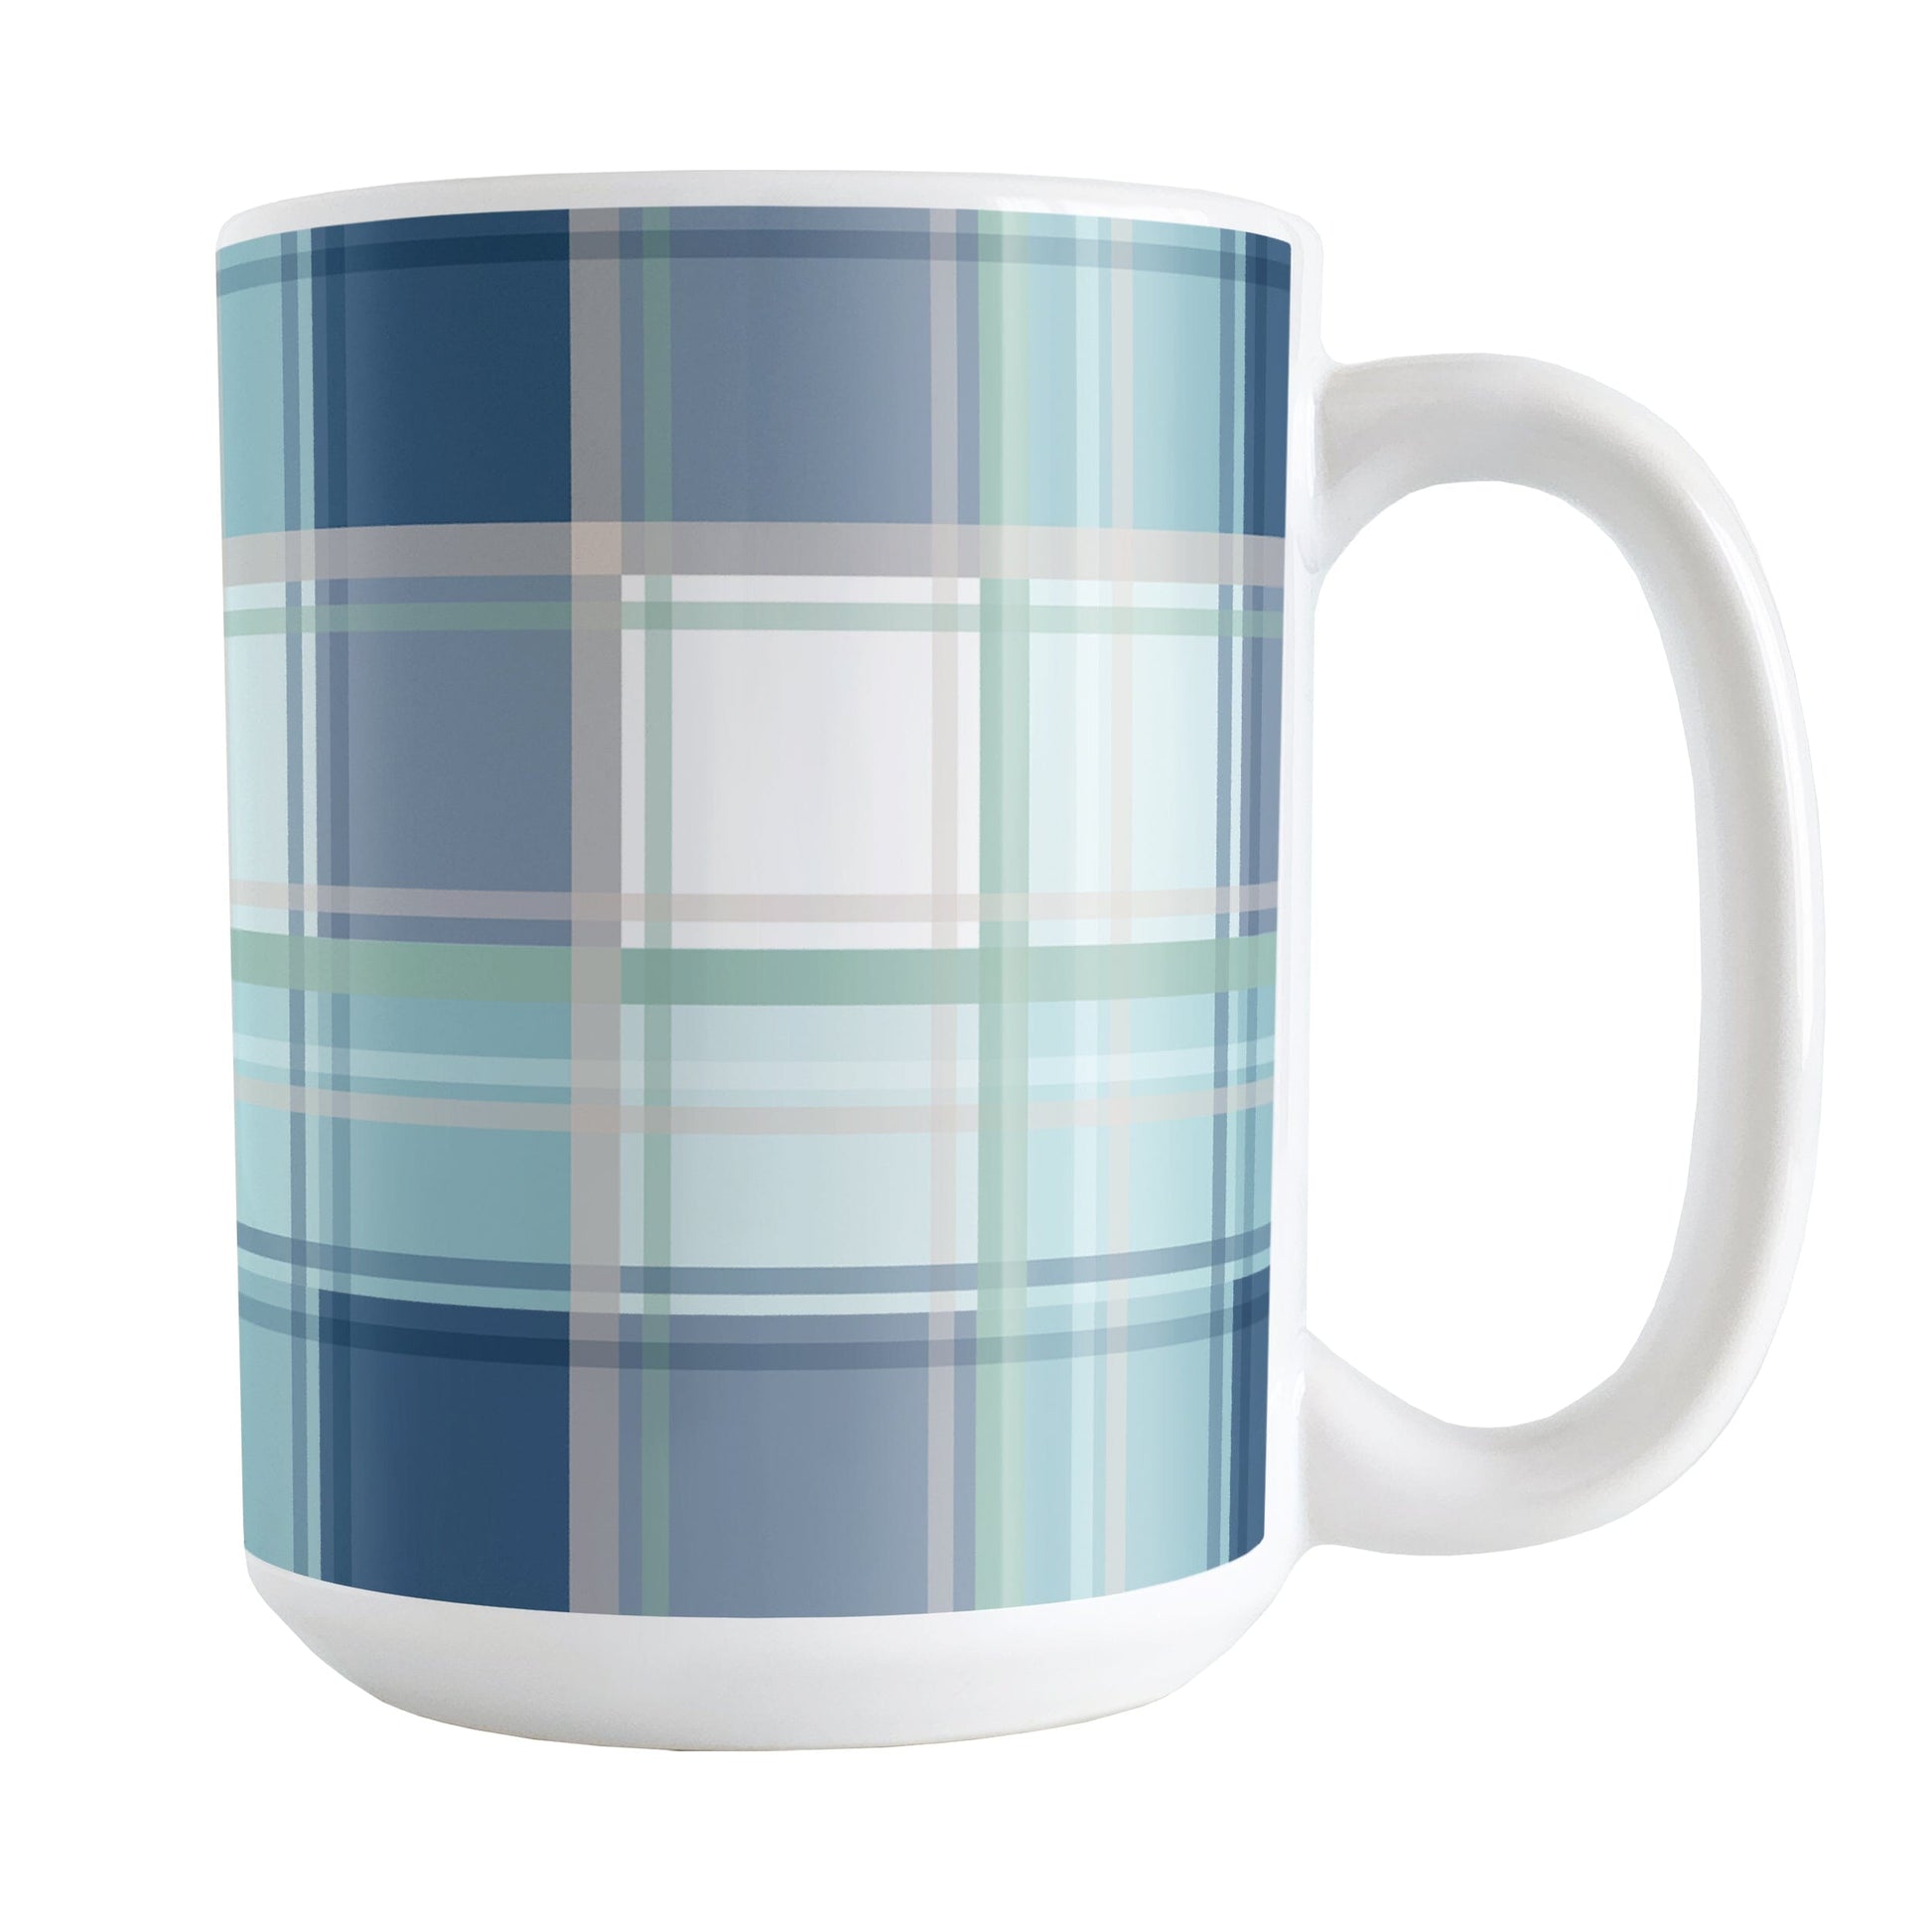 Coastal Plaid Mug (15oz) at Amy's Coffee Mugs. A ceramic coffee mug designed with a plaid pattern in a coastal color scheme that wraps around the mug to the handle. It's the perfect mug for people who love the beach and coastal designs in navy blue, light blue, sandy beige, and green. 